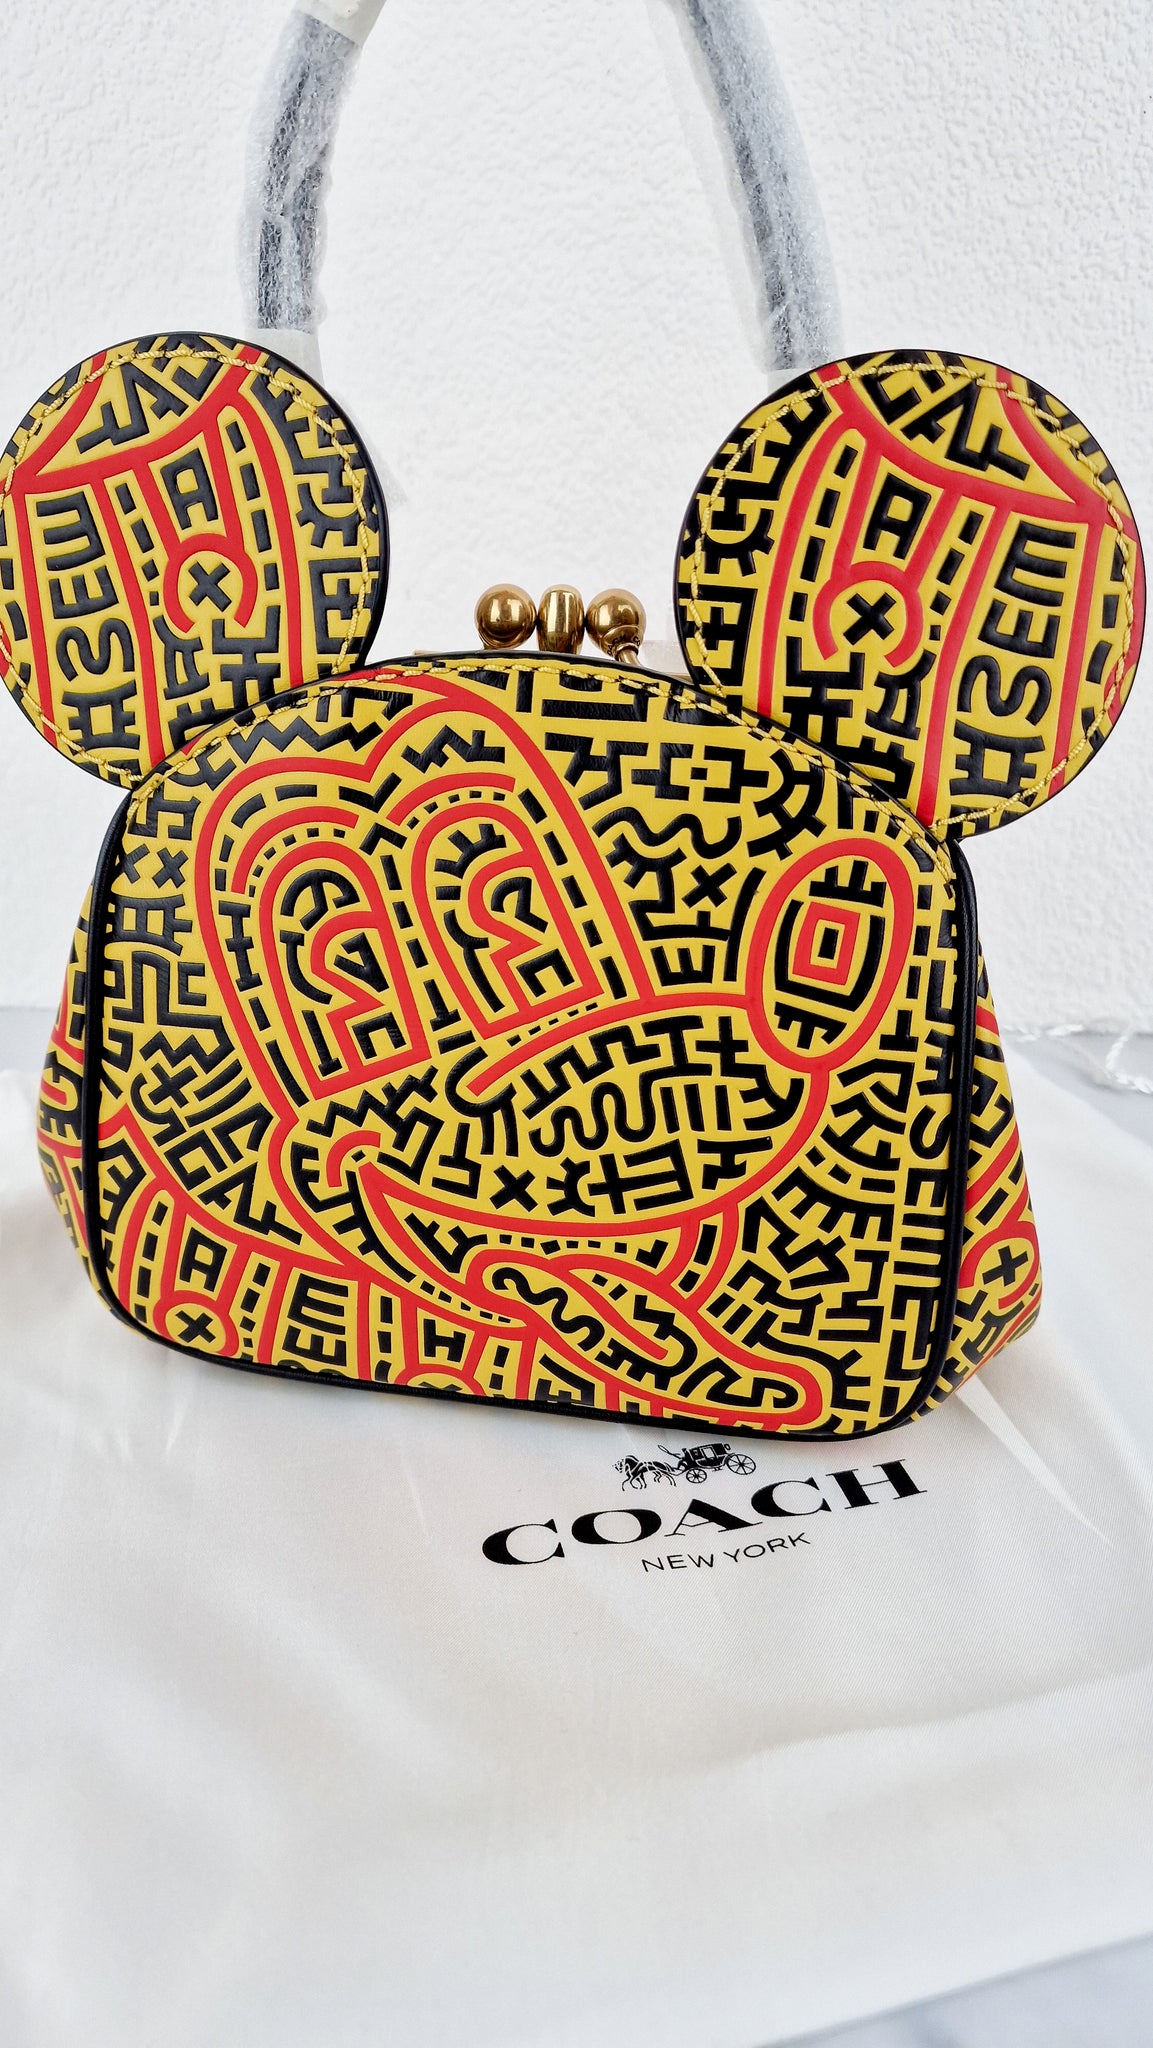 Coach Outlet Disney Mickey Mouse X Keith Haring Kisslock Bag in Red